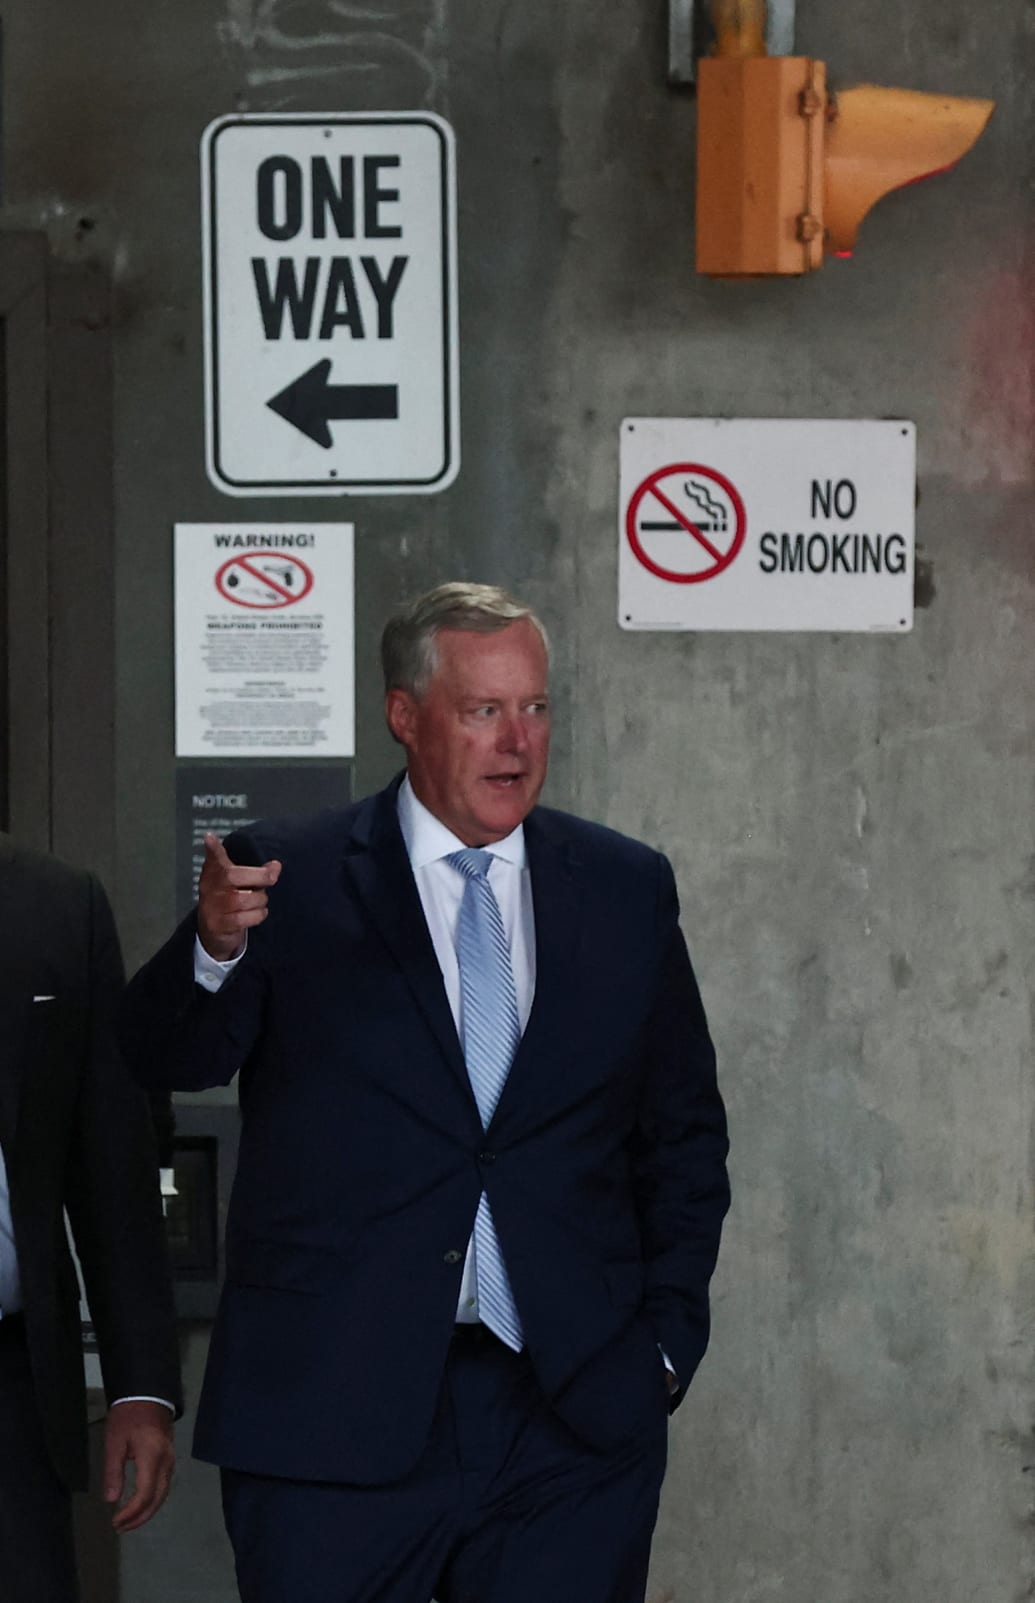 Former U.S. President Donald Trump's Chief of Staff Mark Meadows walks out of the United States District Court for the Northern District of Georgia